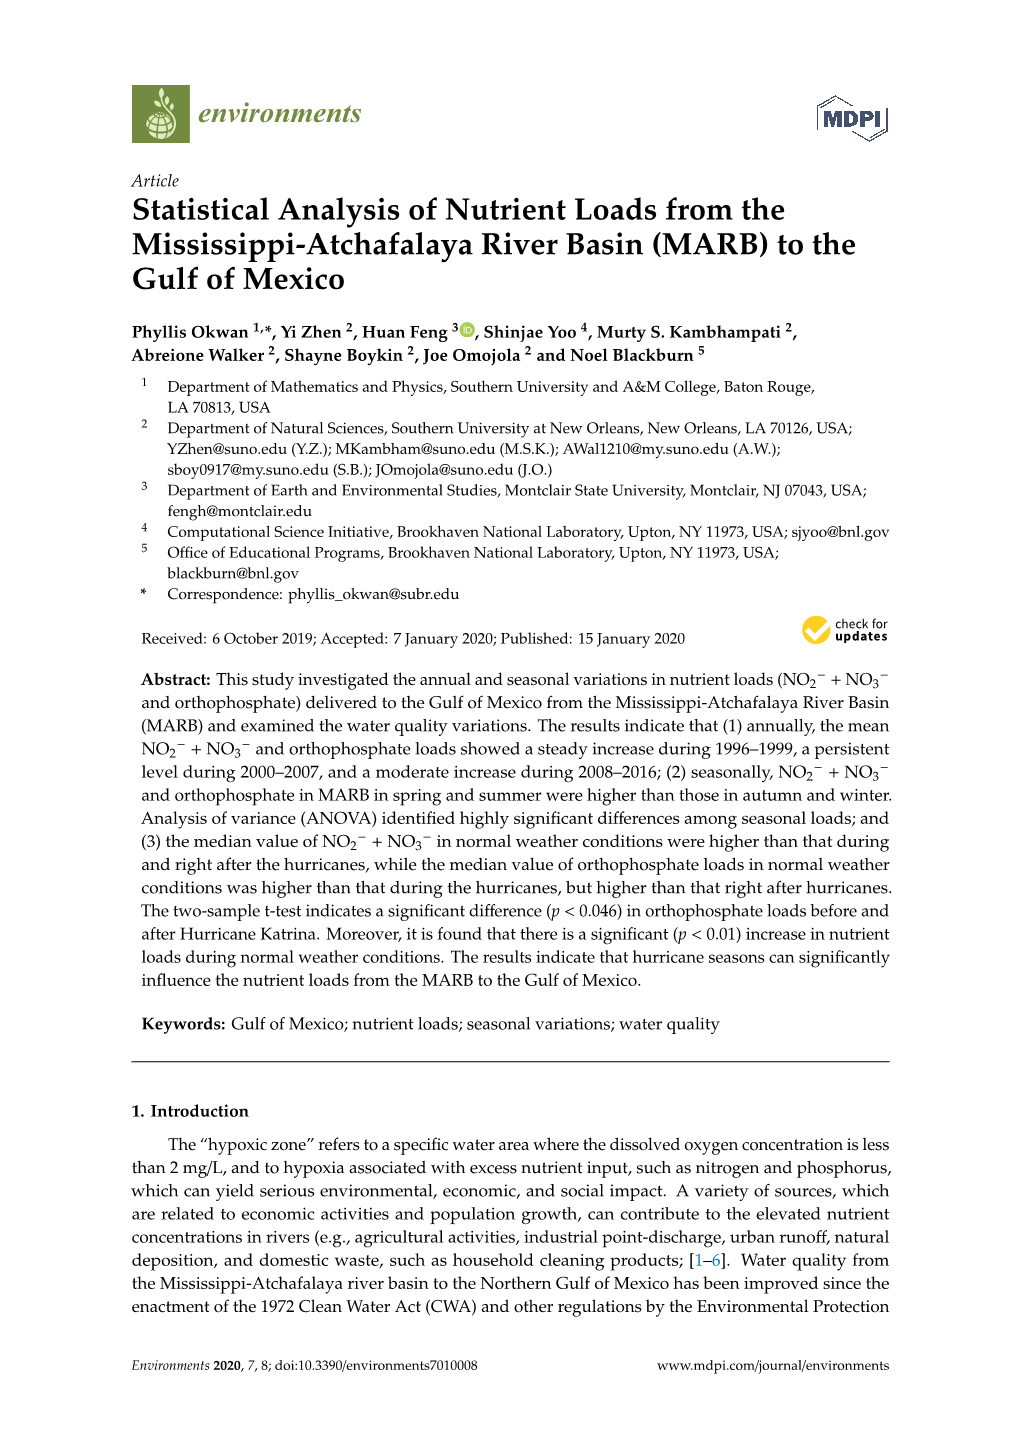 Statistical Analysis of Nutrient Loads from the Mississippi-Atchafalaya River Basin (MARB) to the Gulf of Mexico